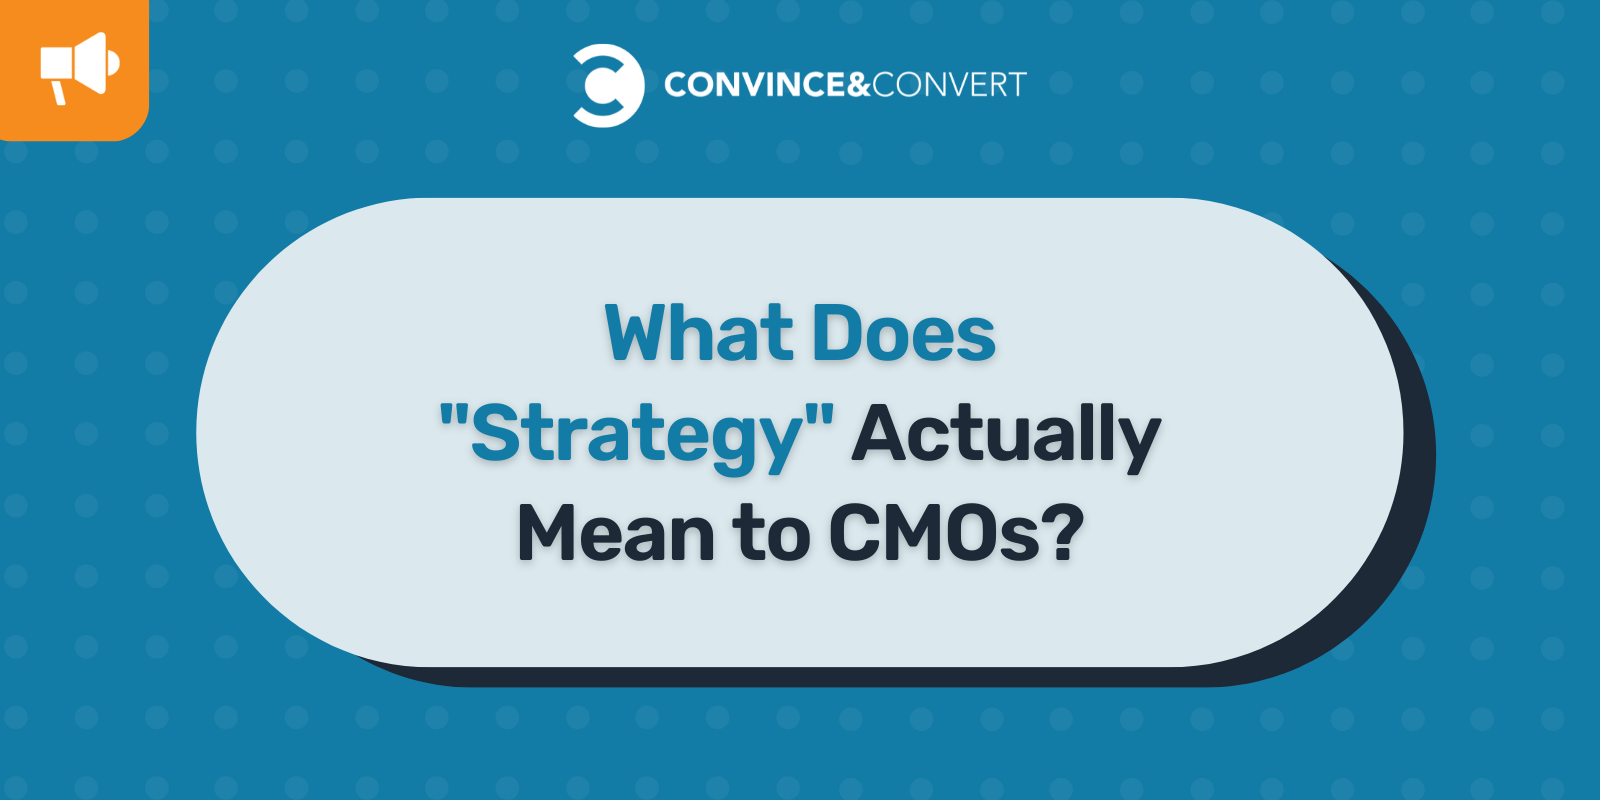 You are currently viewing What Does “Strategy” Actually Mean to CMOs?